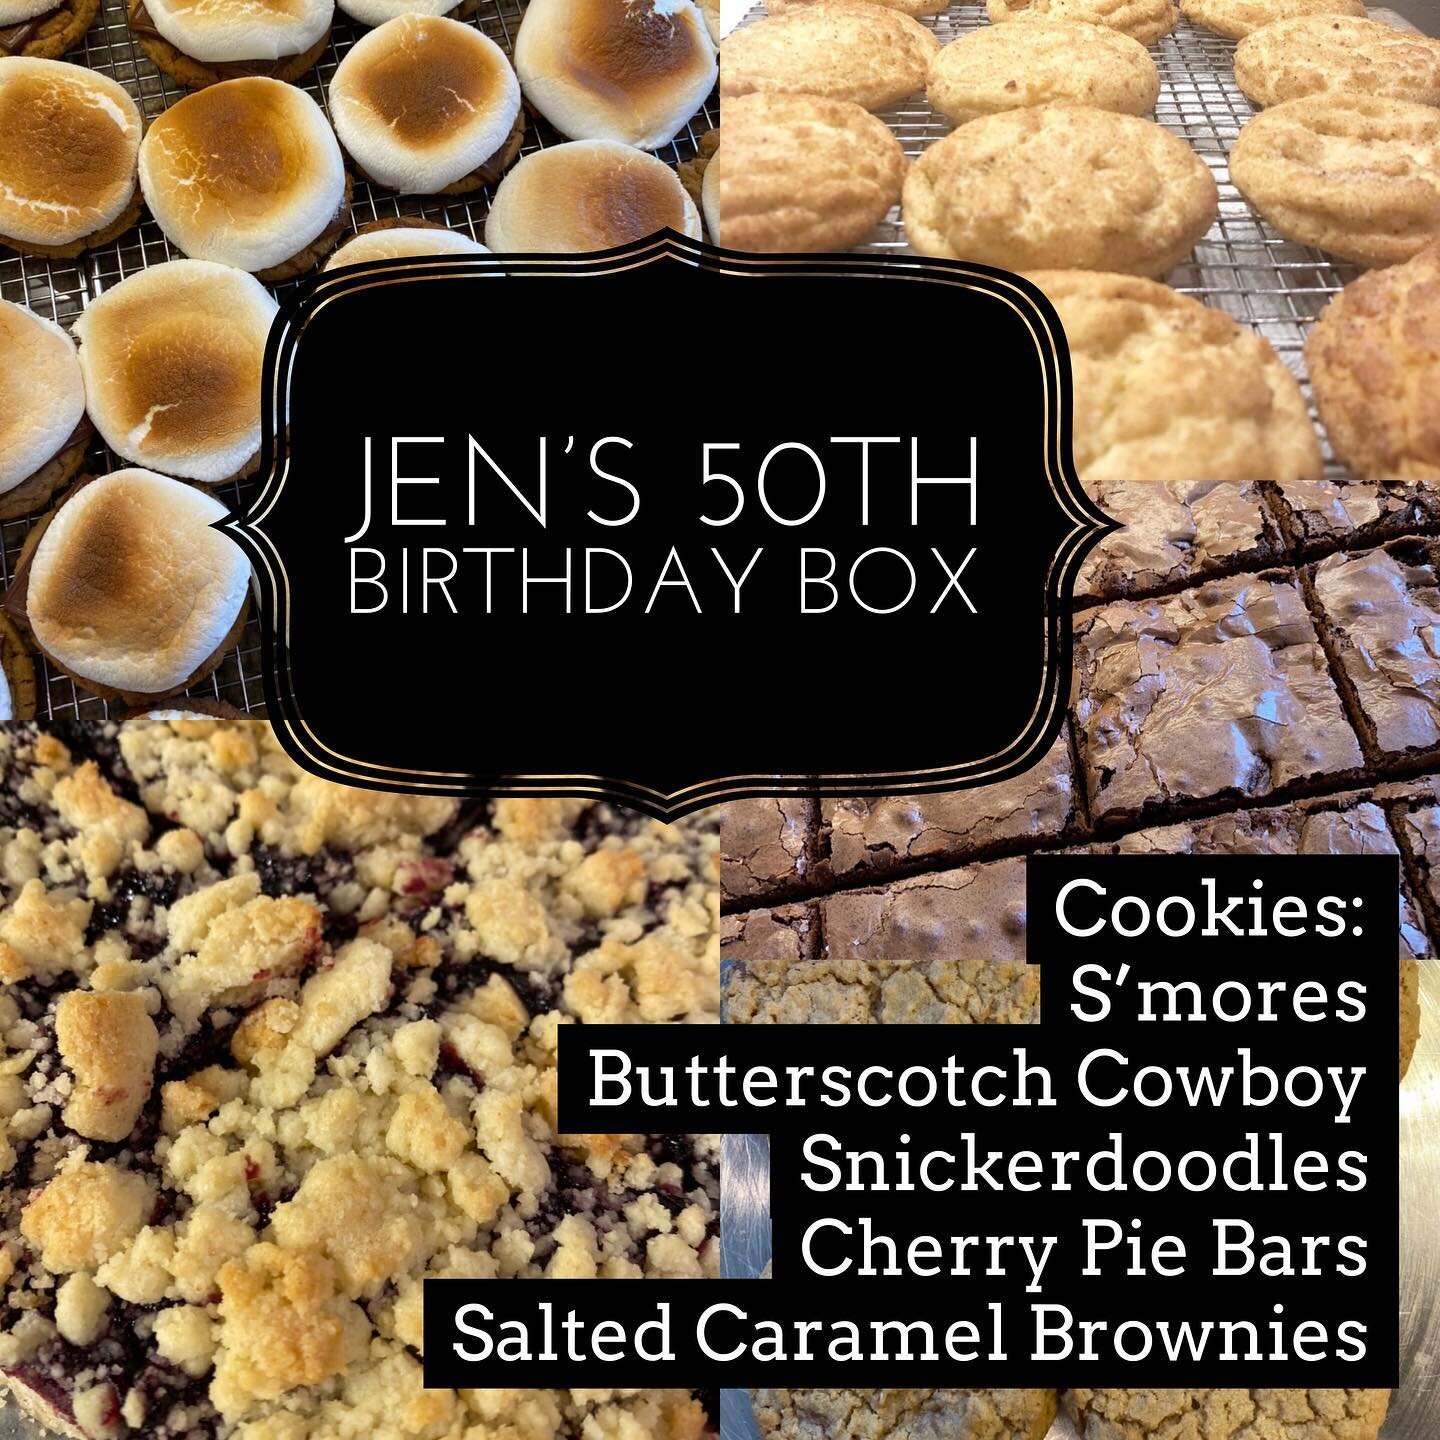 New week, New box!! This week we&rsquo;re celebrating Jen&rsquo;s 50th Birthday with a box of her favorite #fishwifesweets!! Jen is my right hand girl, cake decorator extraordinaire &amp; all around amazing force here in our house! She started out wo